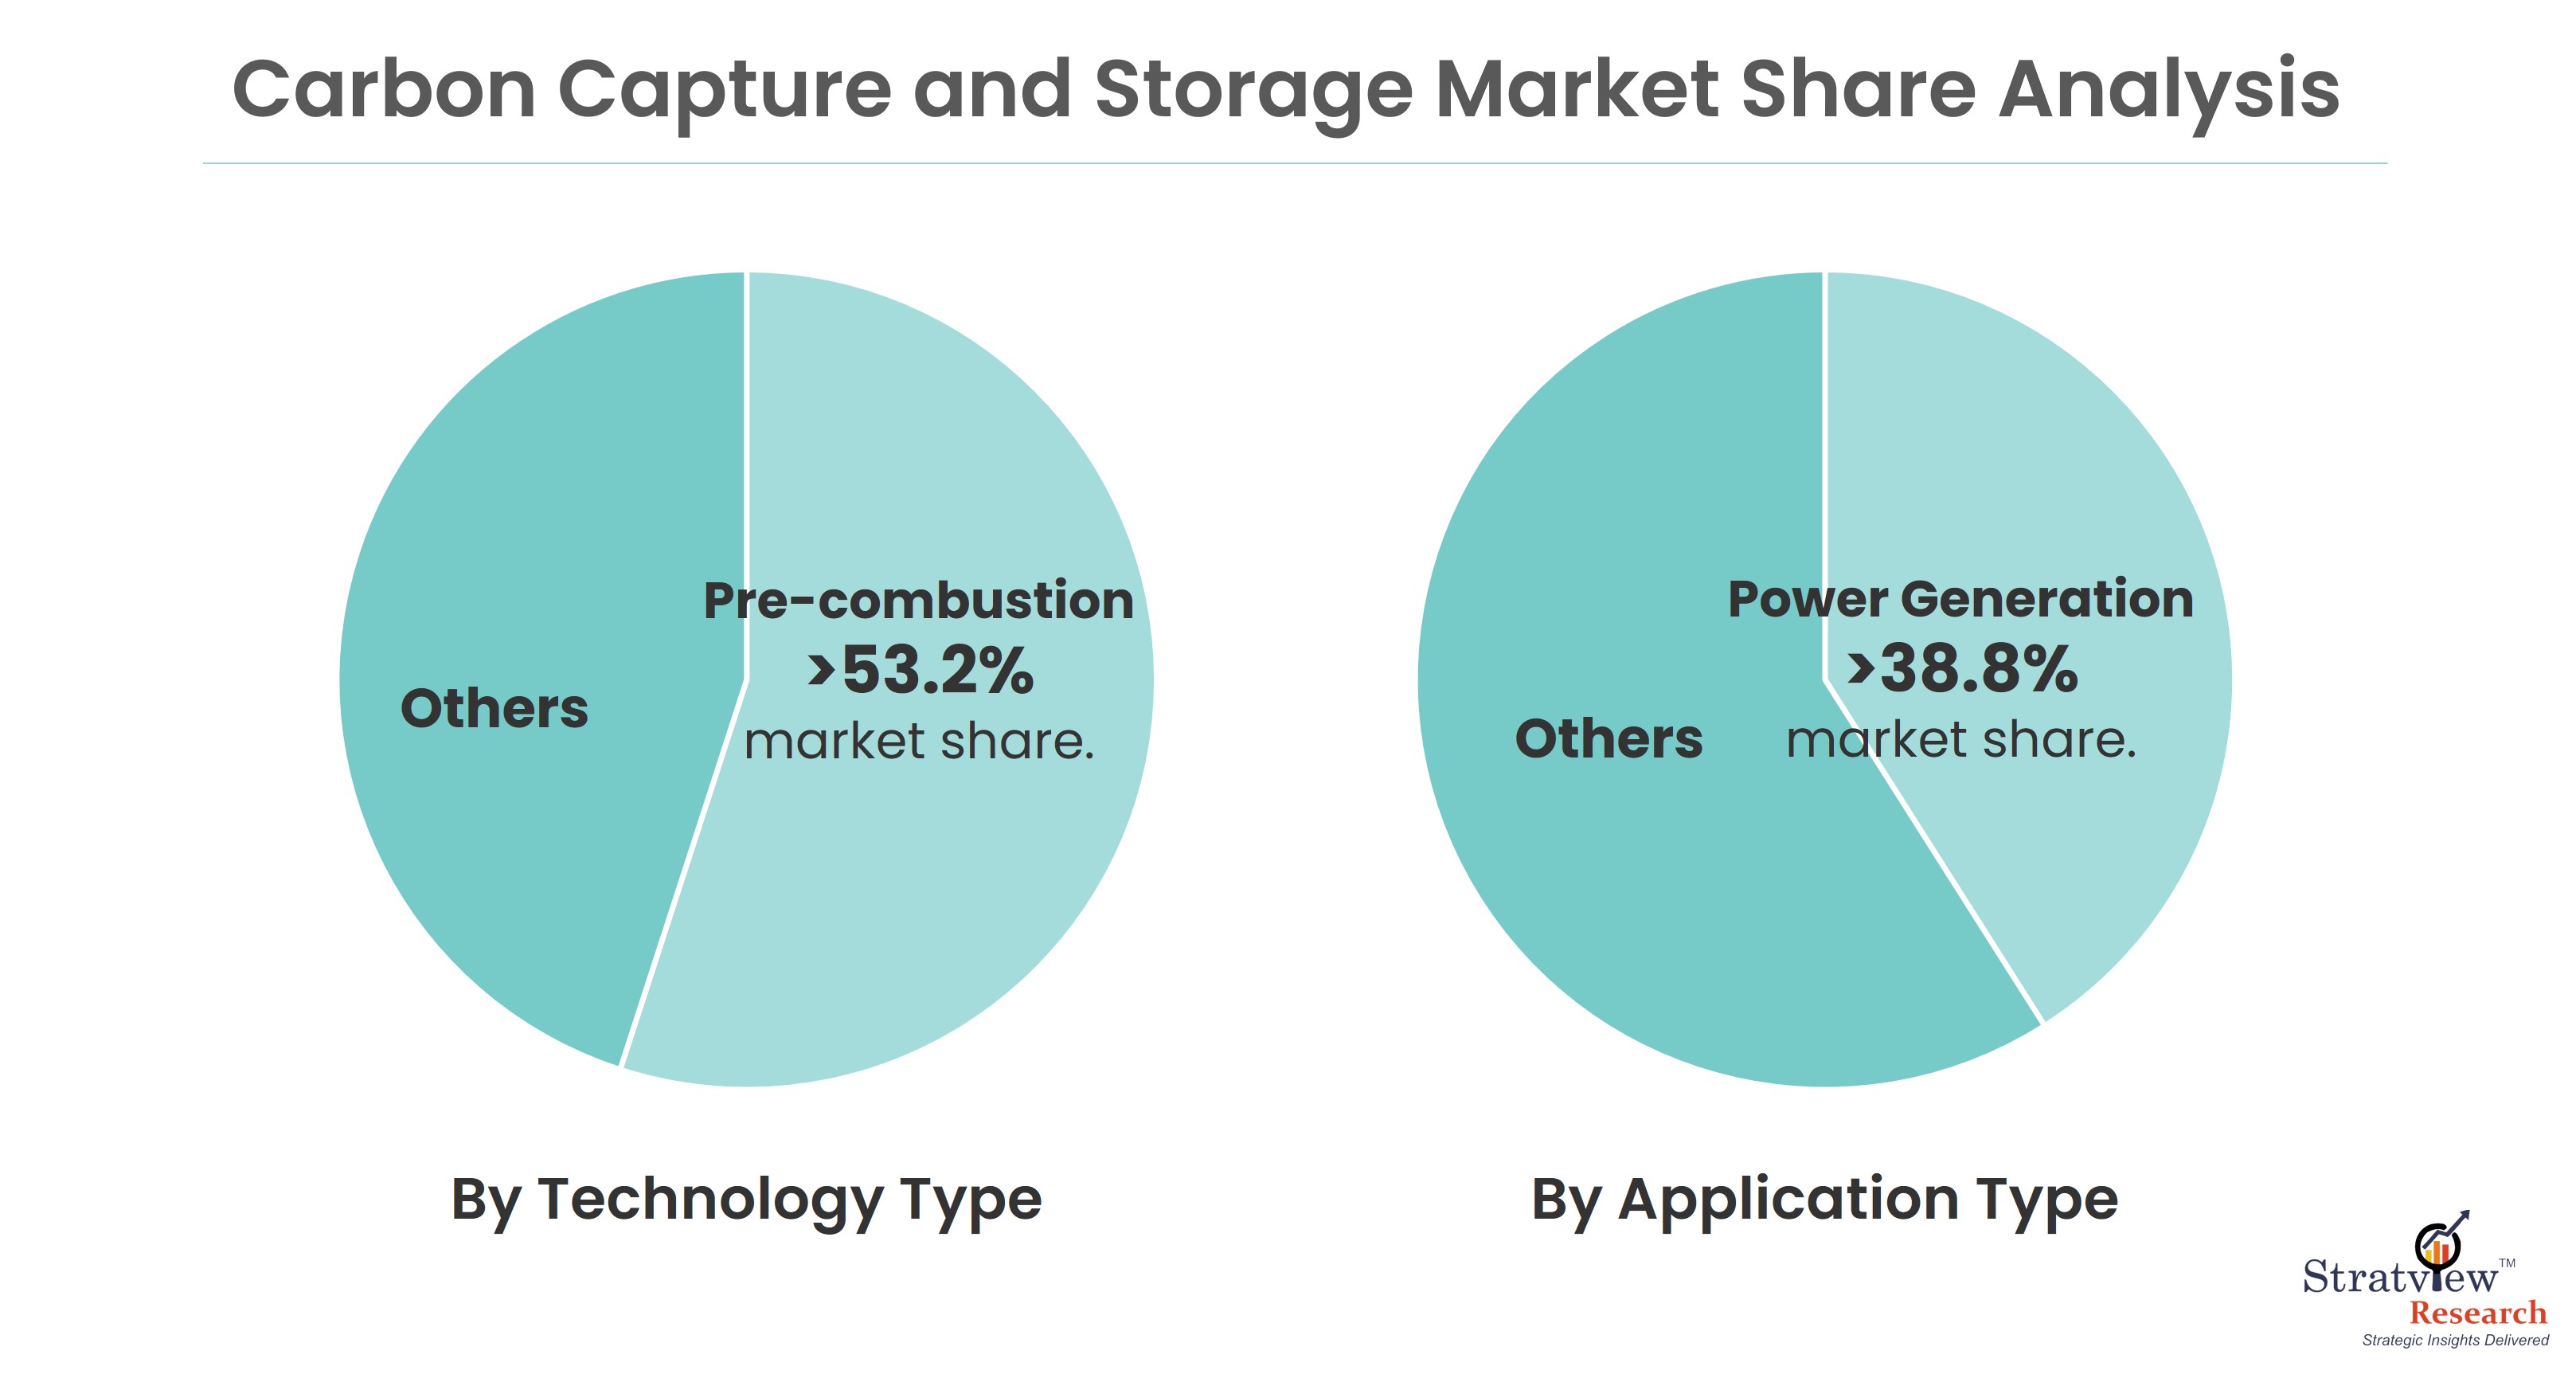 Carbon Capture and Storage Market Share